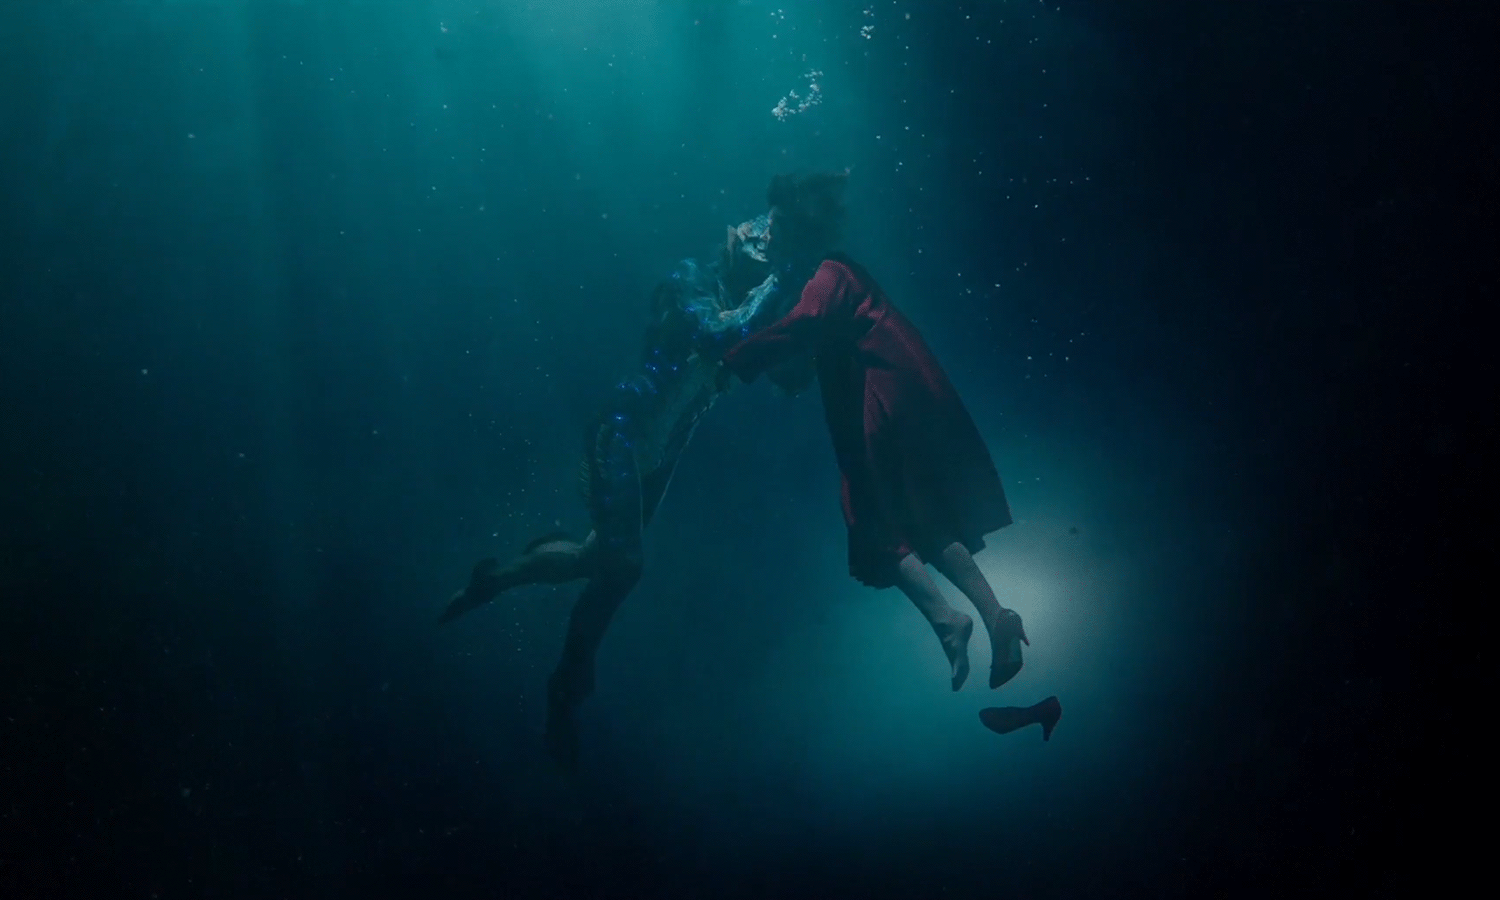 The Shape of Water Movie Review